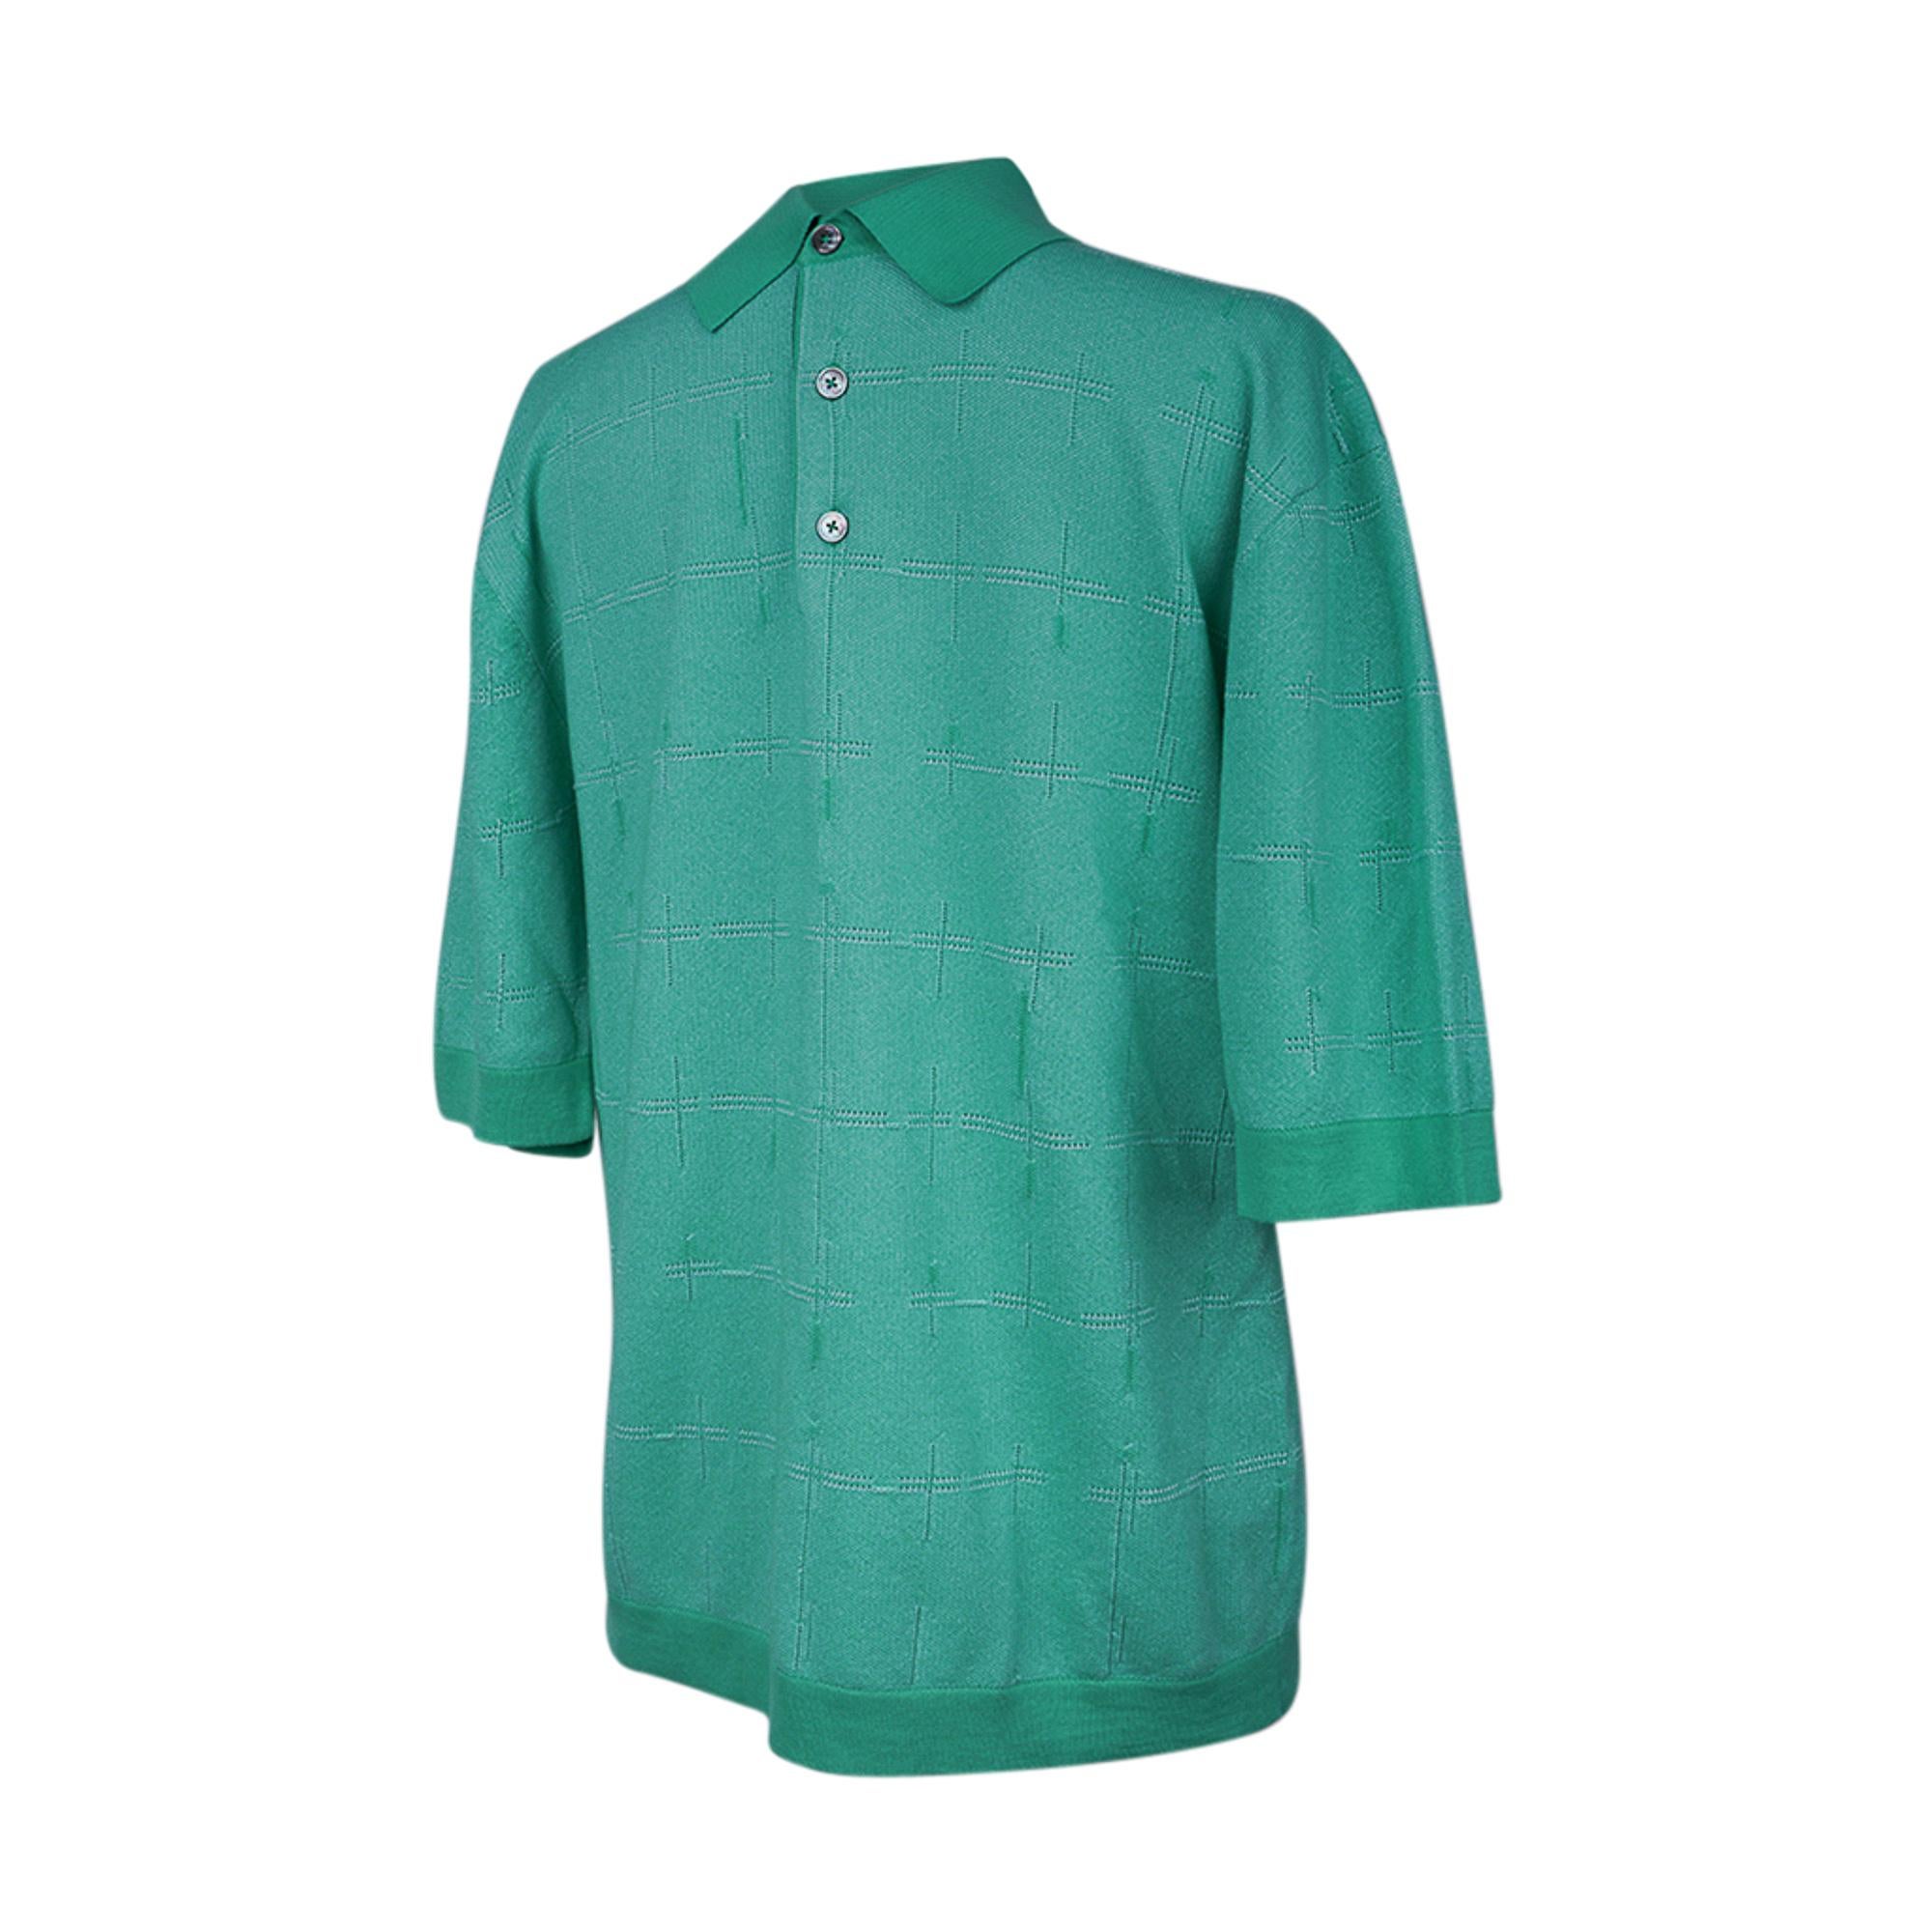 Mightychic offers an Hermes H en Carreaux Boxy Fit Polo shirt featured in Vert Tendre.
Subtle stich detail creates a tone on tone H motif.
Three (3) mother of pearl buttons.
Short sleeve shirt runs true to size.
Classic style and effortless